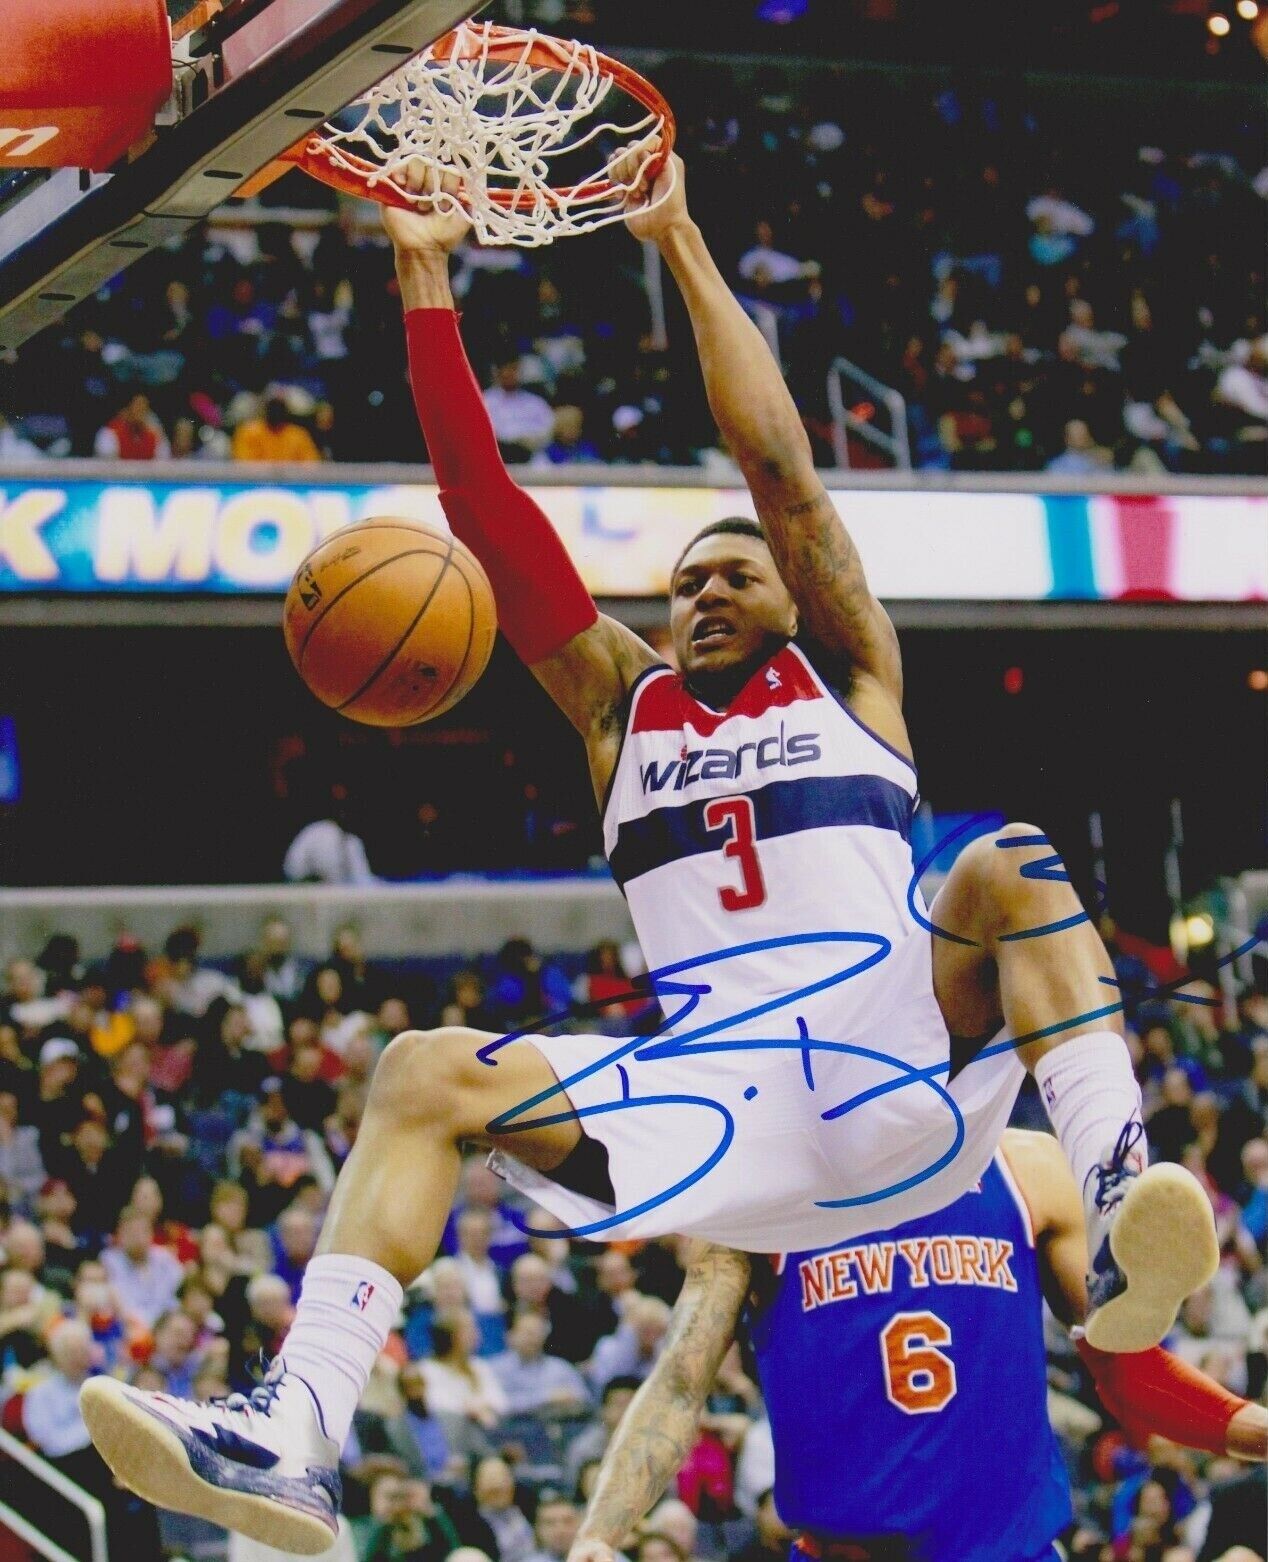 Bradley Beal Autographed Signed 8x10 Photo Poster painting ( Wizards ) REPRINT